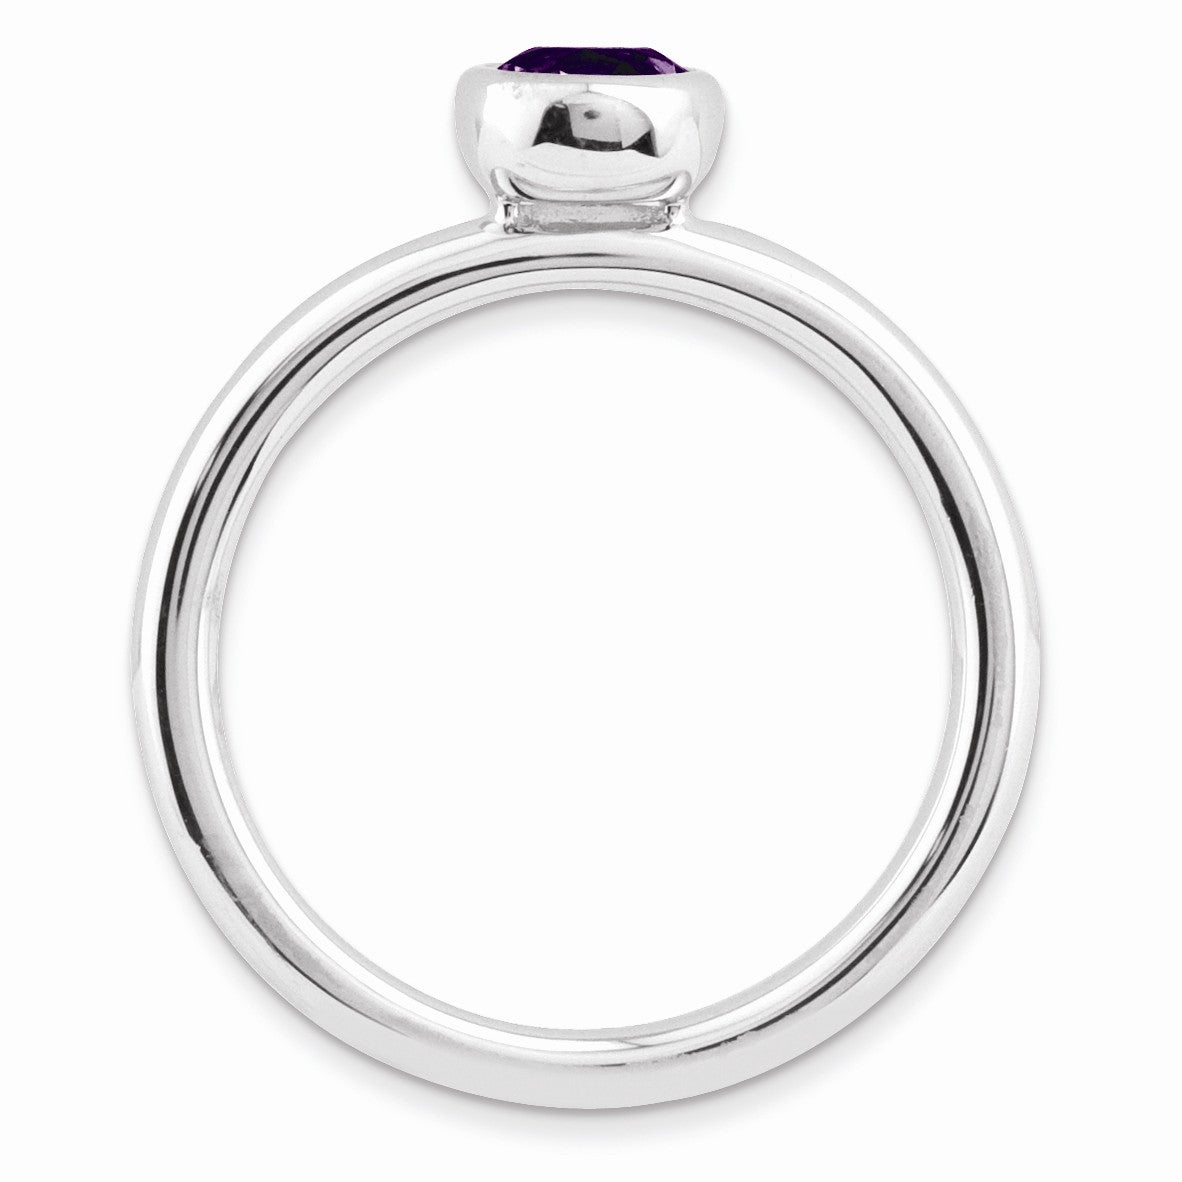 Alternate view of the Rhodium Plated Sterling Silver Low Profile 5mm Amethyst Stack Ring by The Black Bow Jewelry Co.